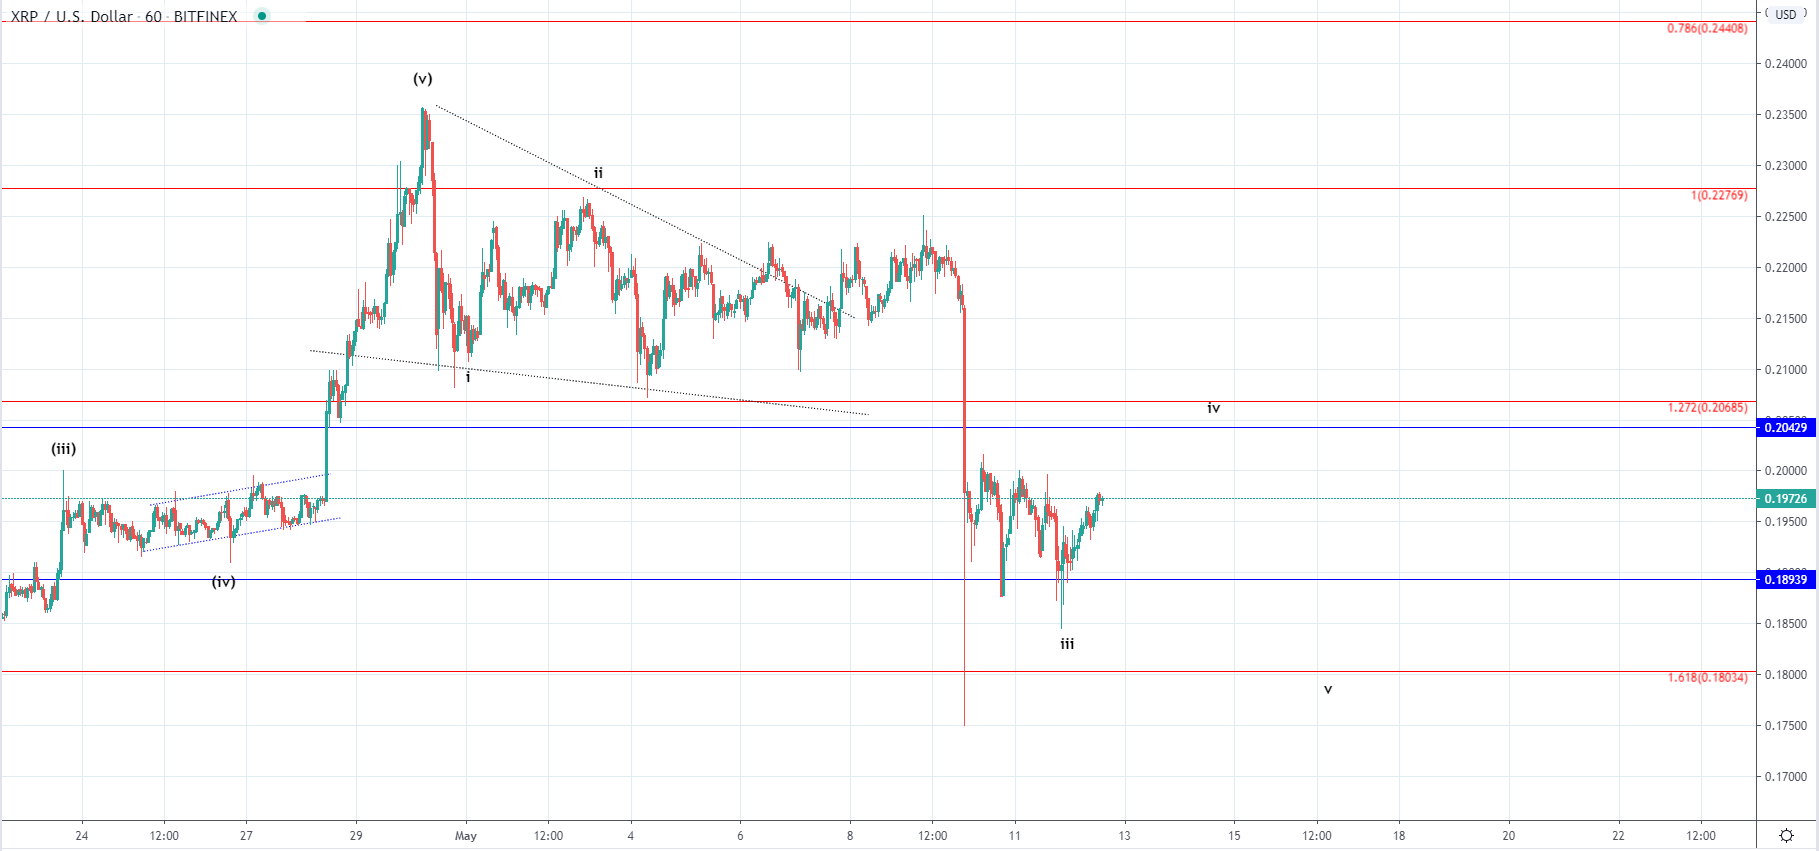 BTC and XRP - Major price decreases, but recovery on the horizon